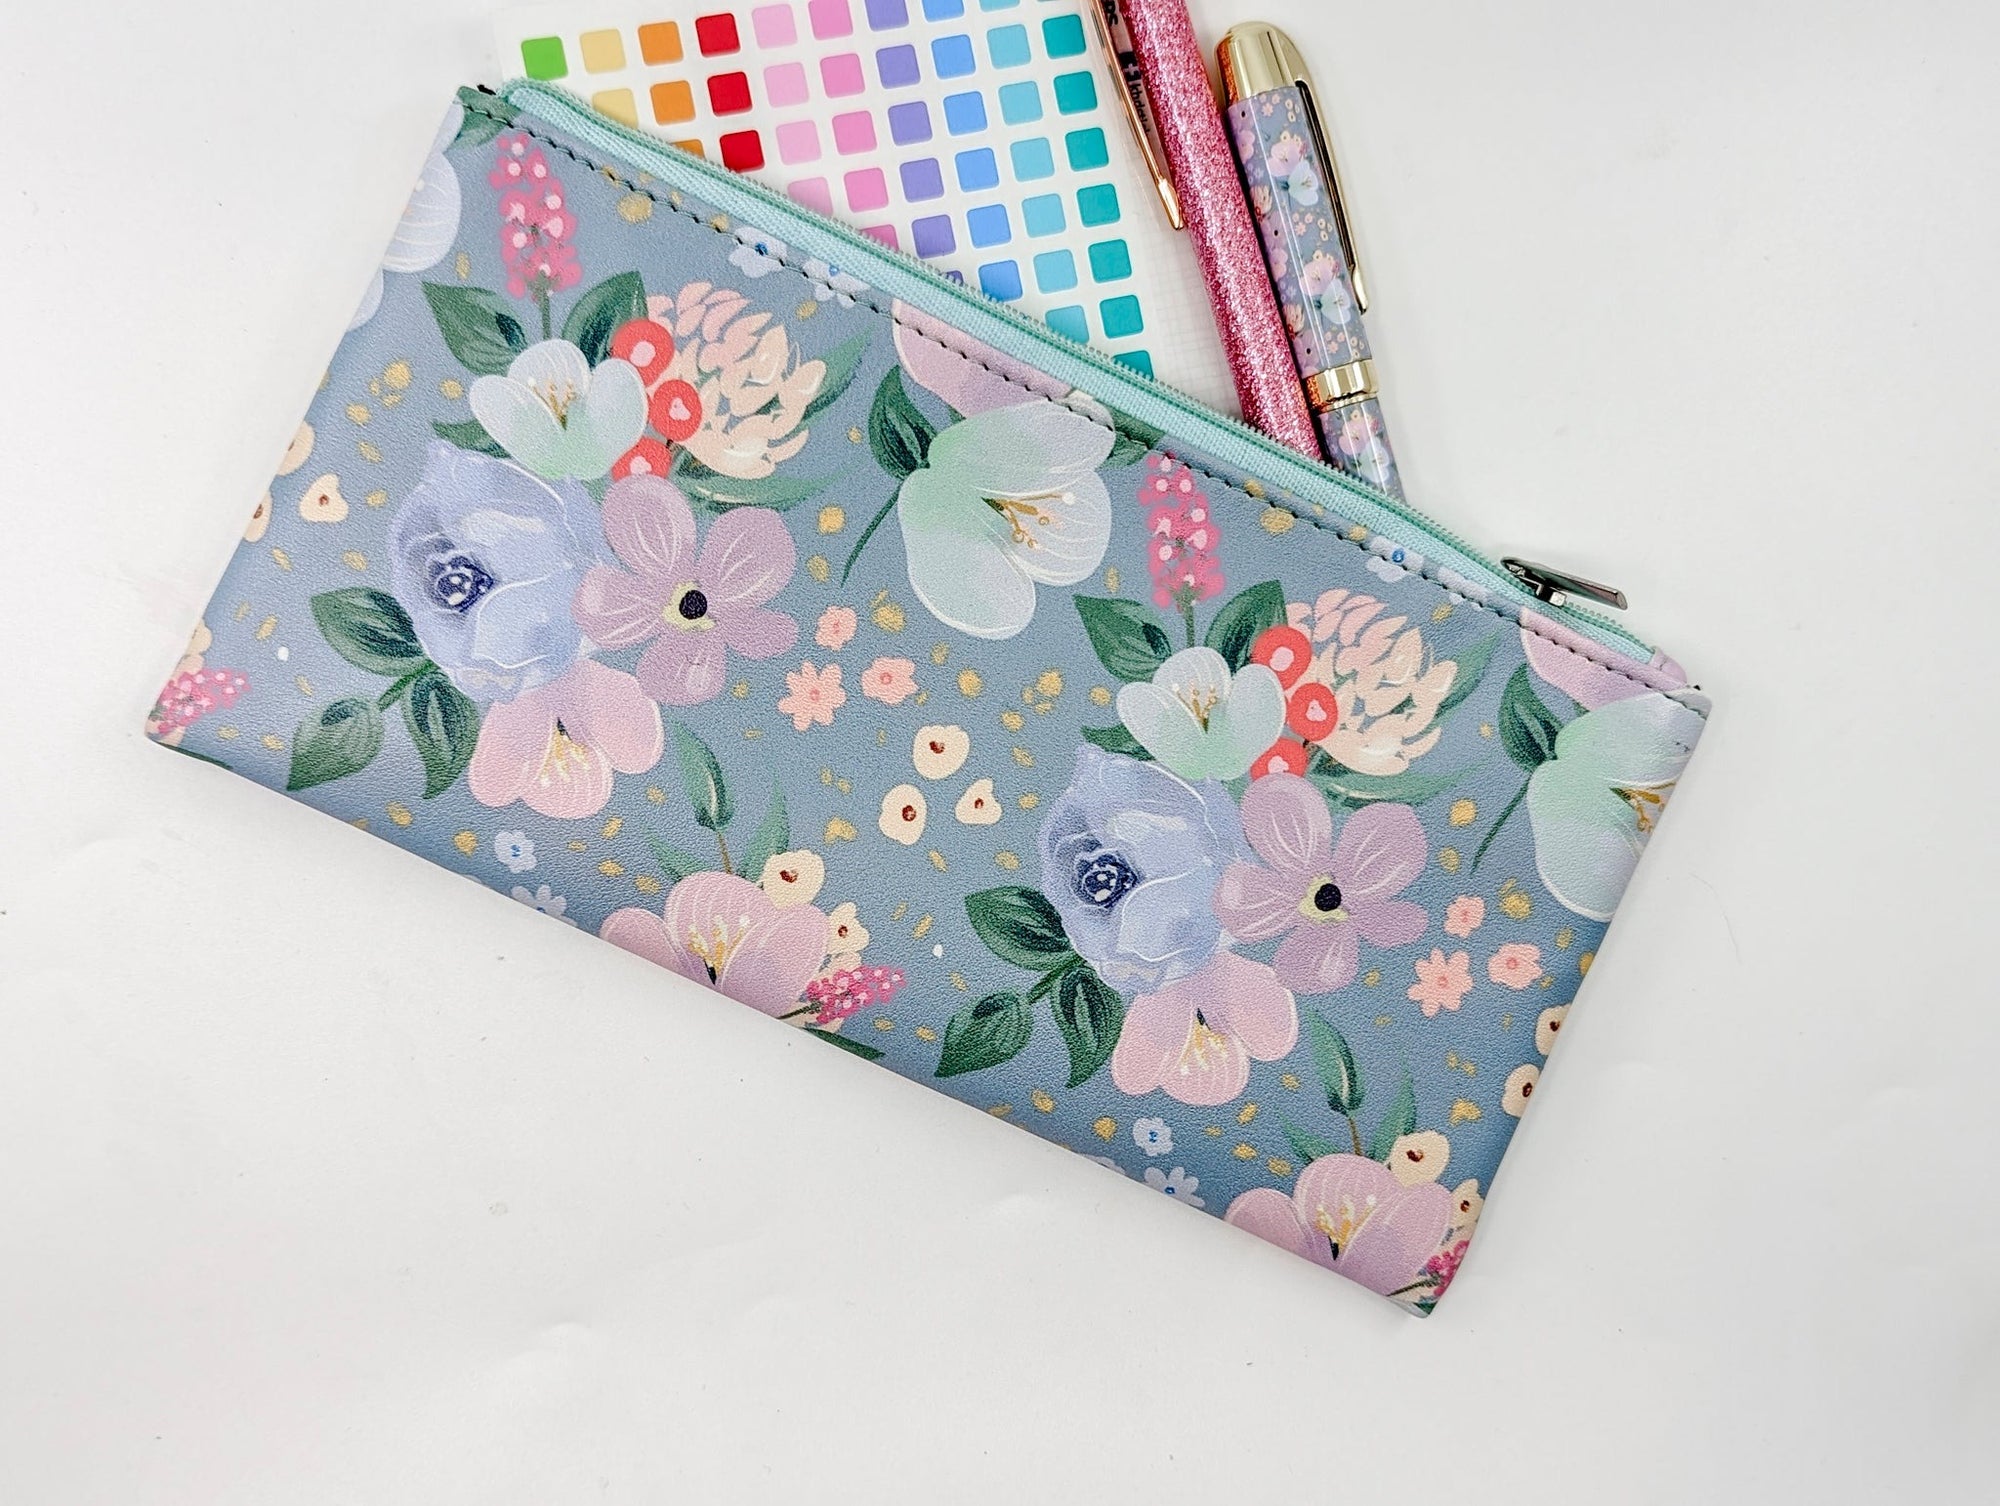 After the Storm Pencil Case